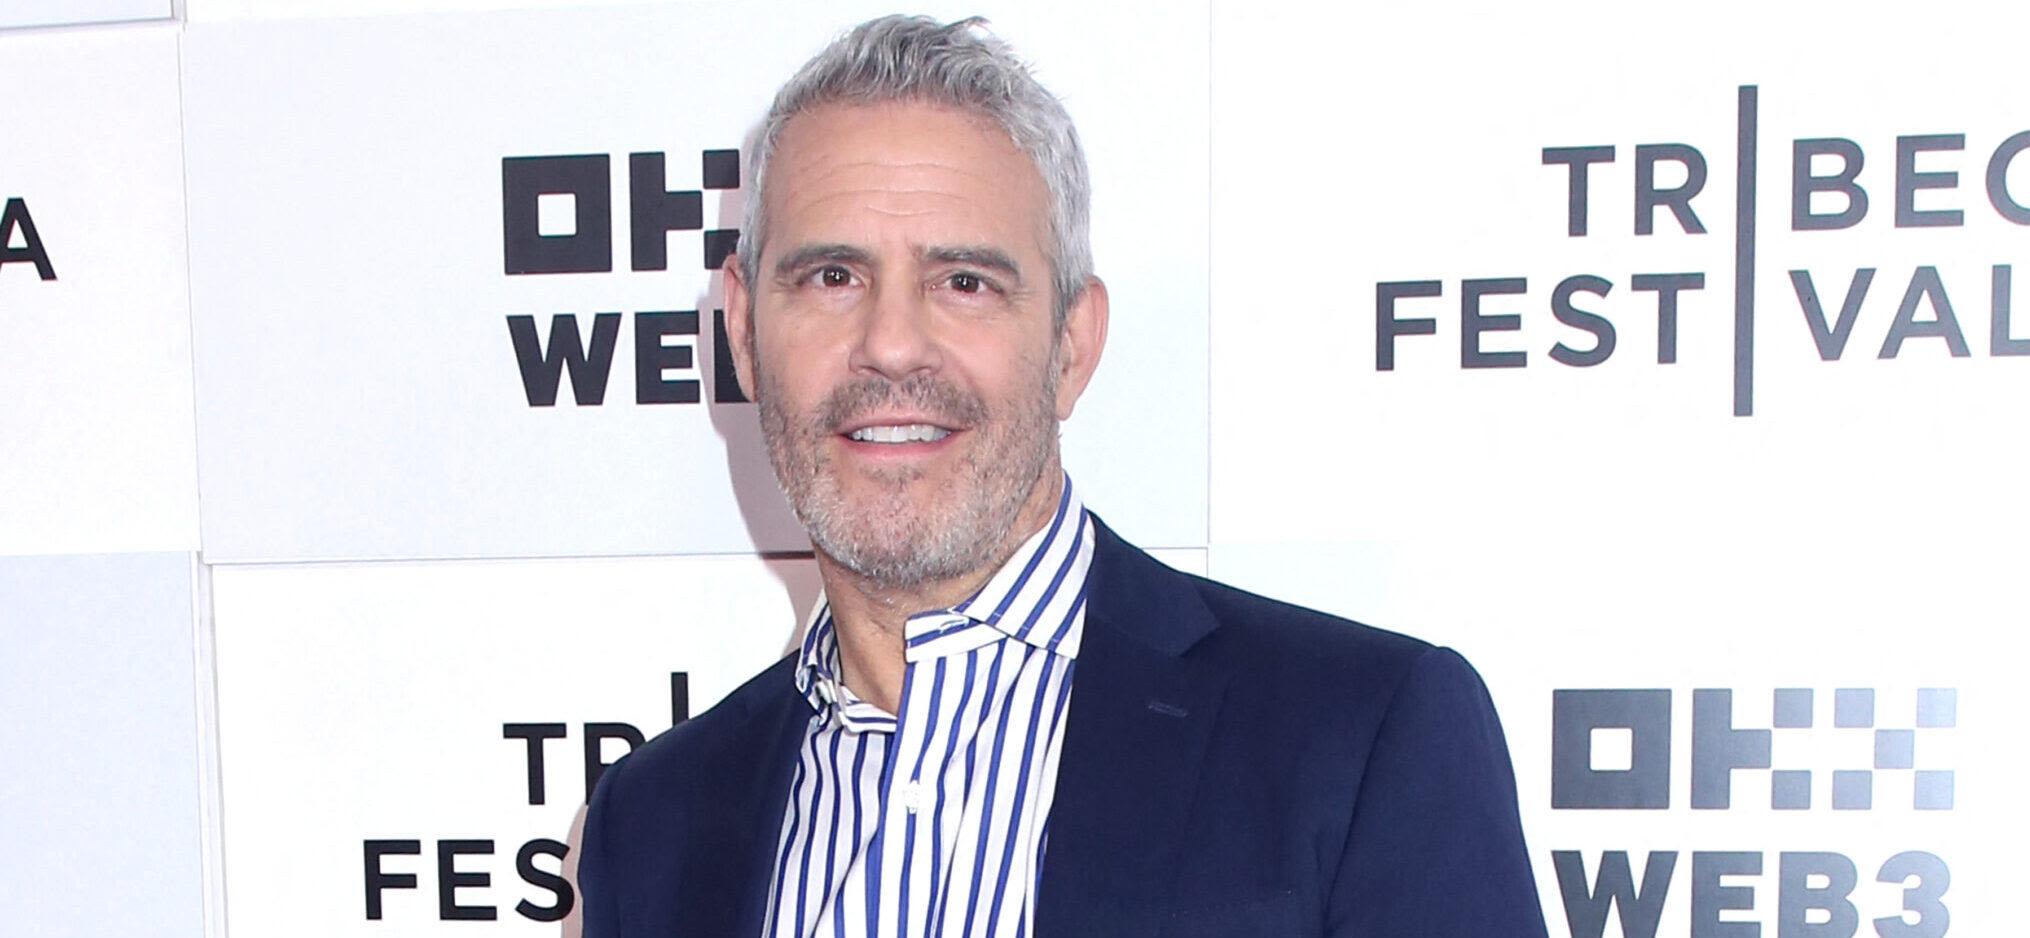 Andy Cohen Toasts To 15 Years Of 'Watch What Happens Live' With FRESCA Mixed